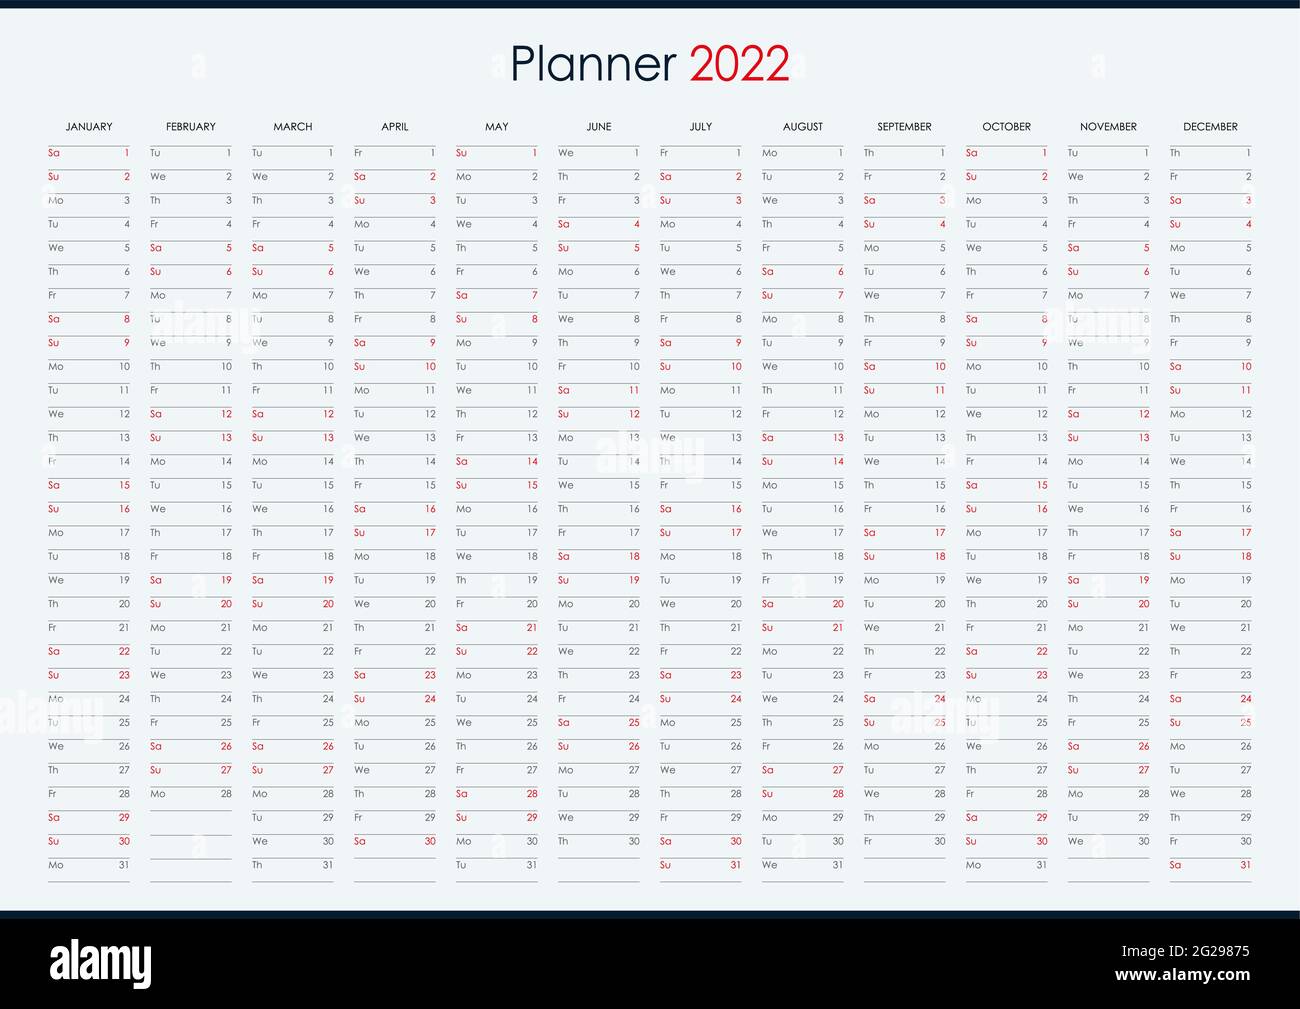 planner-calendar-for-2022-wall-organizer-yearly-planner-template